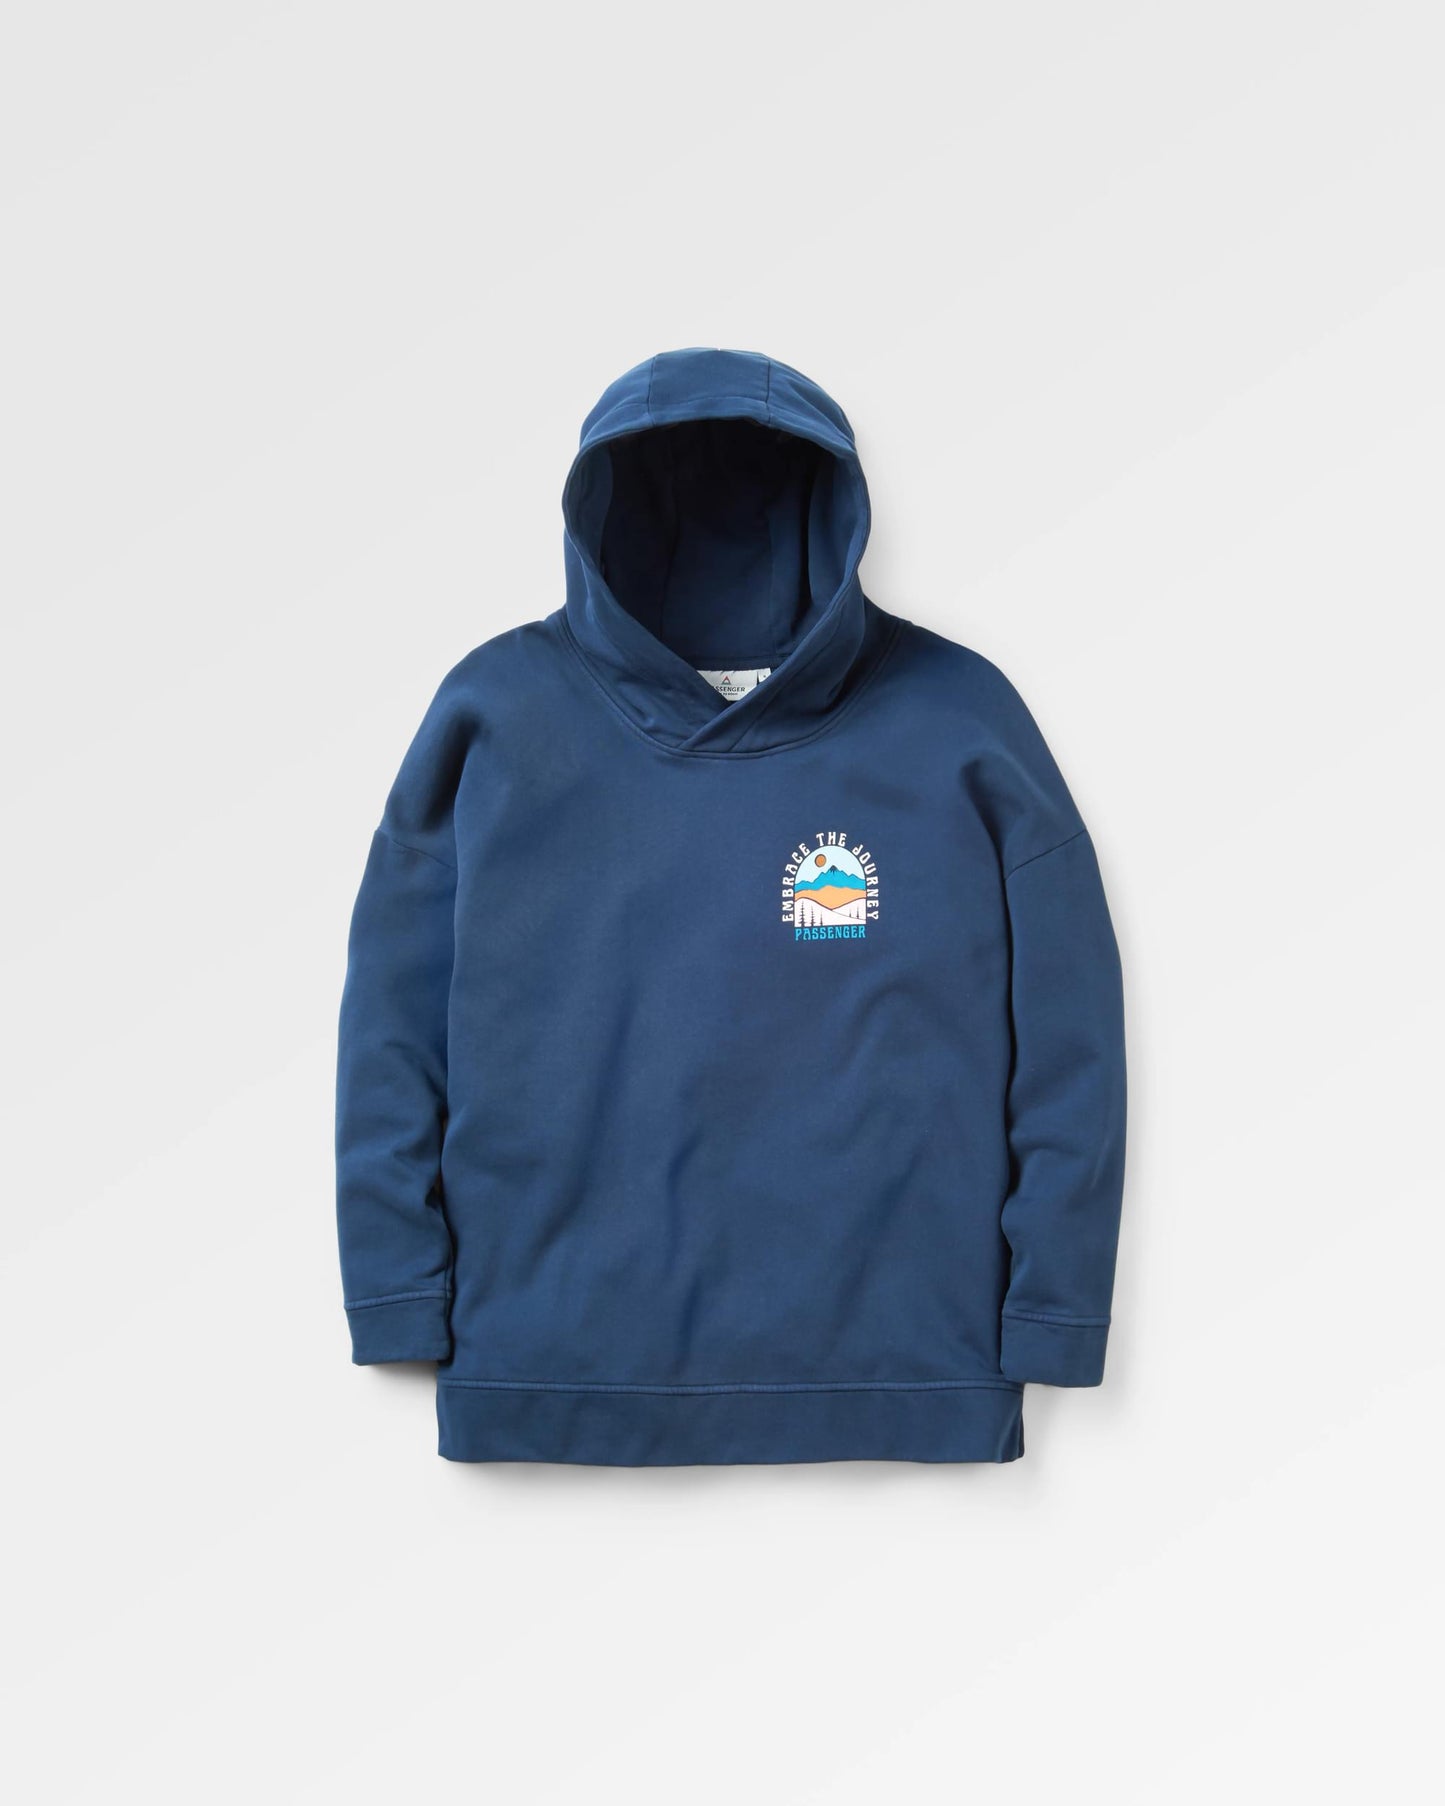 Outlook Recycled Cotton Hoodie - Rich Navy